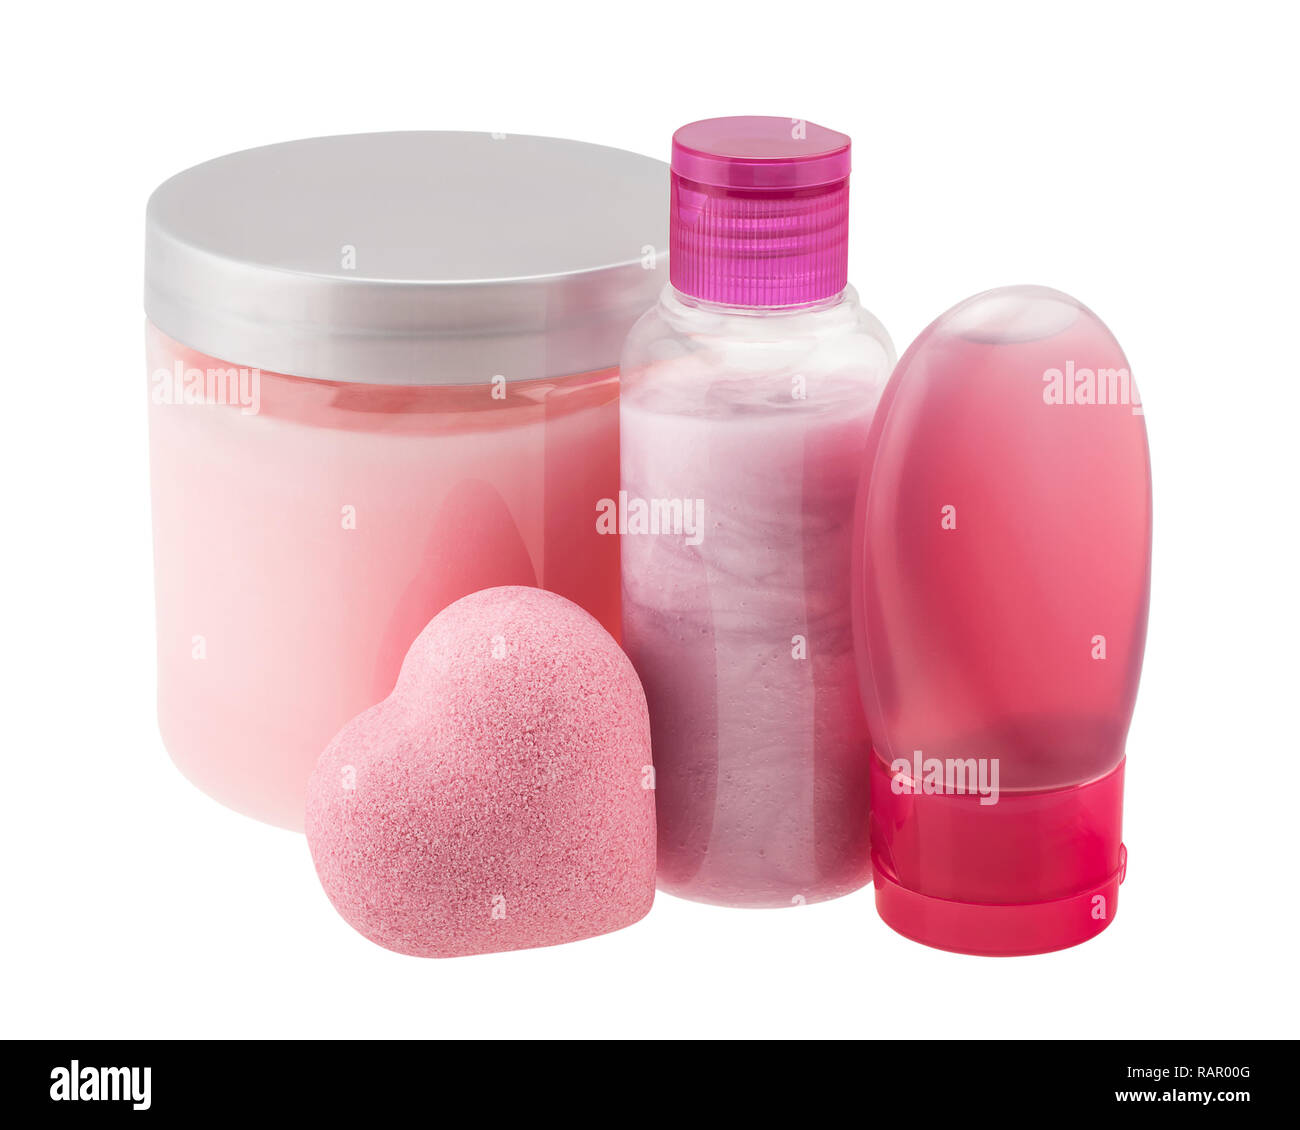 Composition of cosmetic products in shades of pink Stock Photo